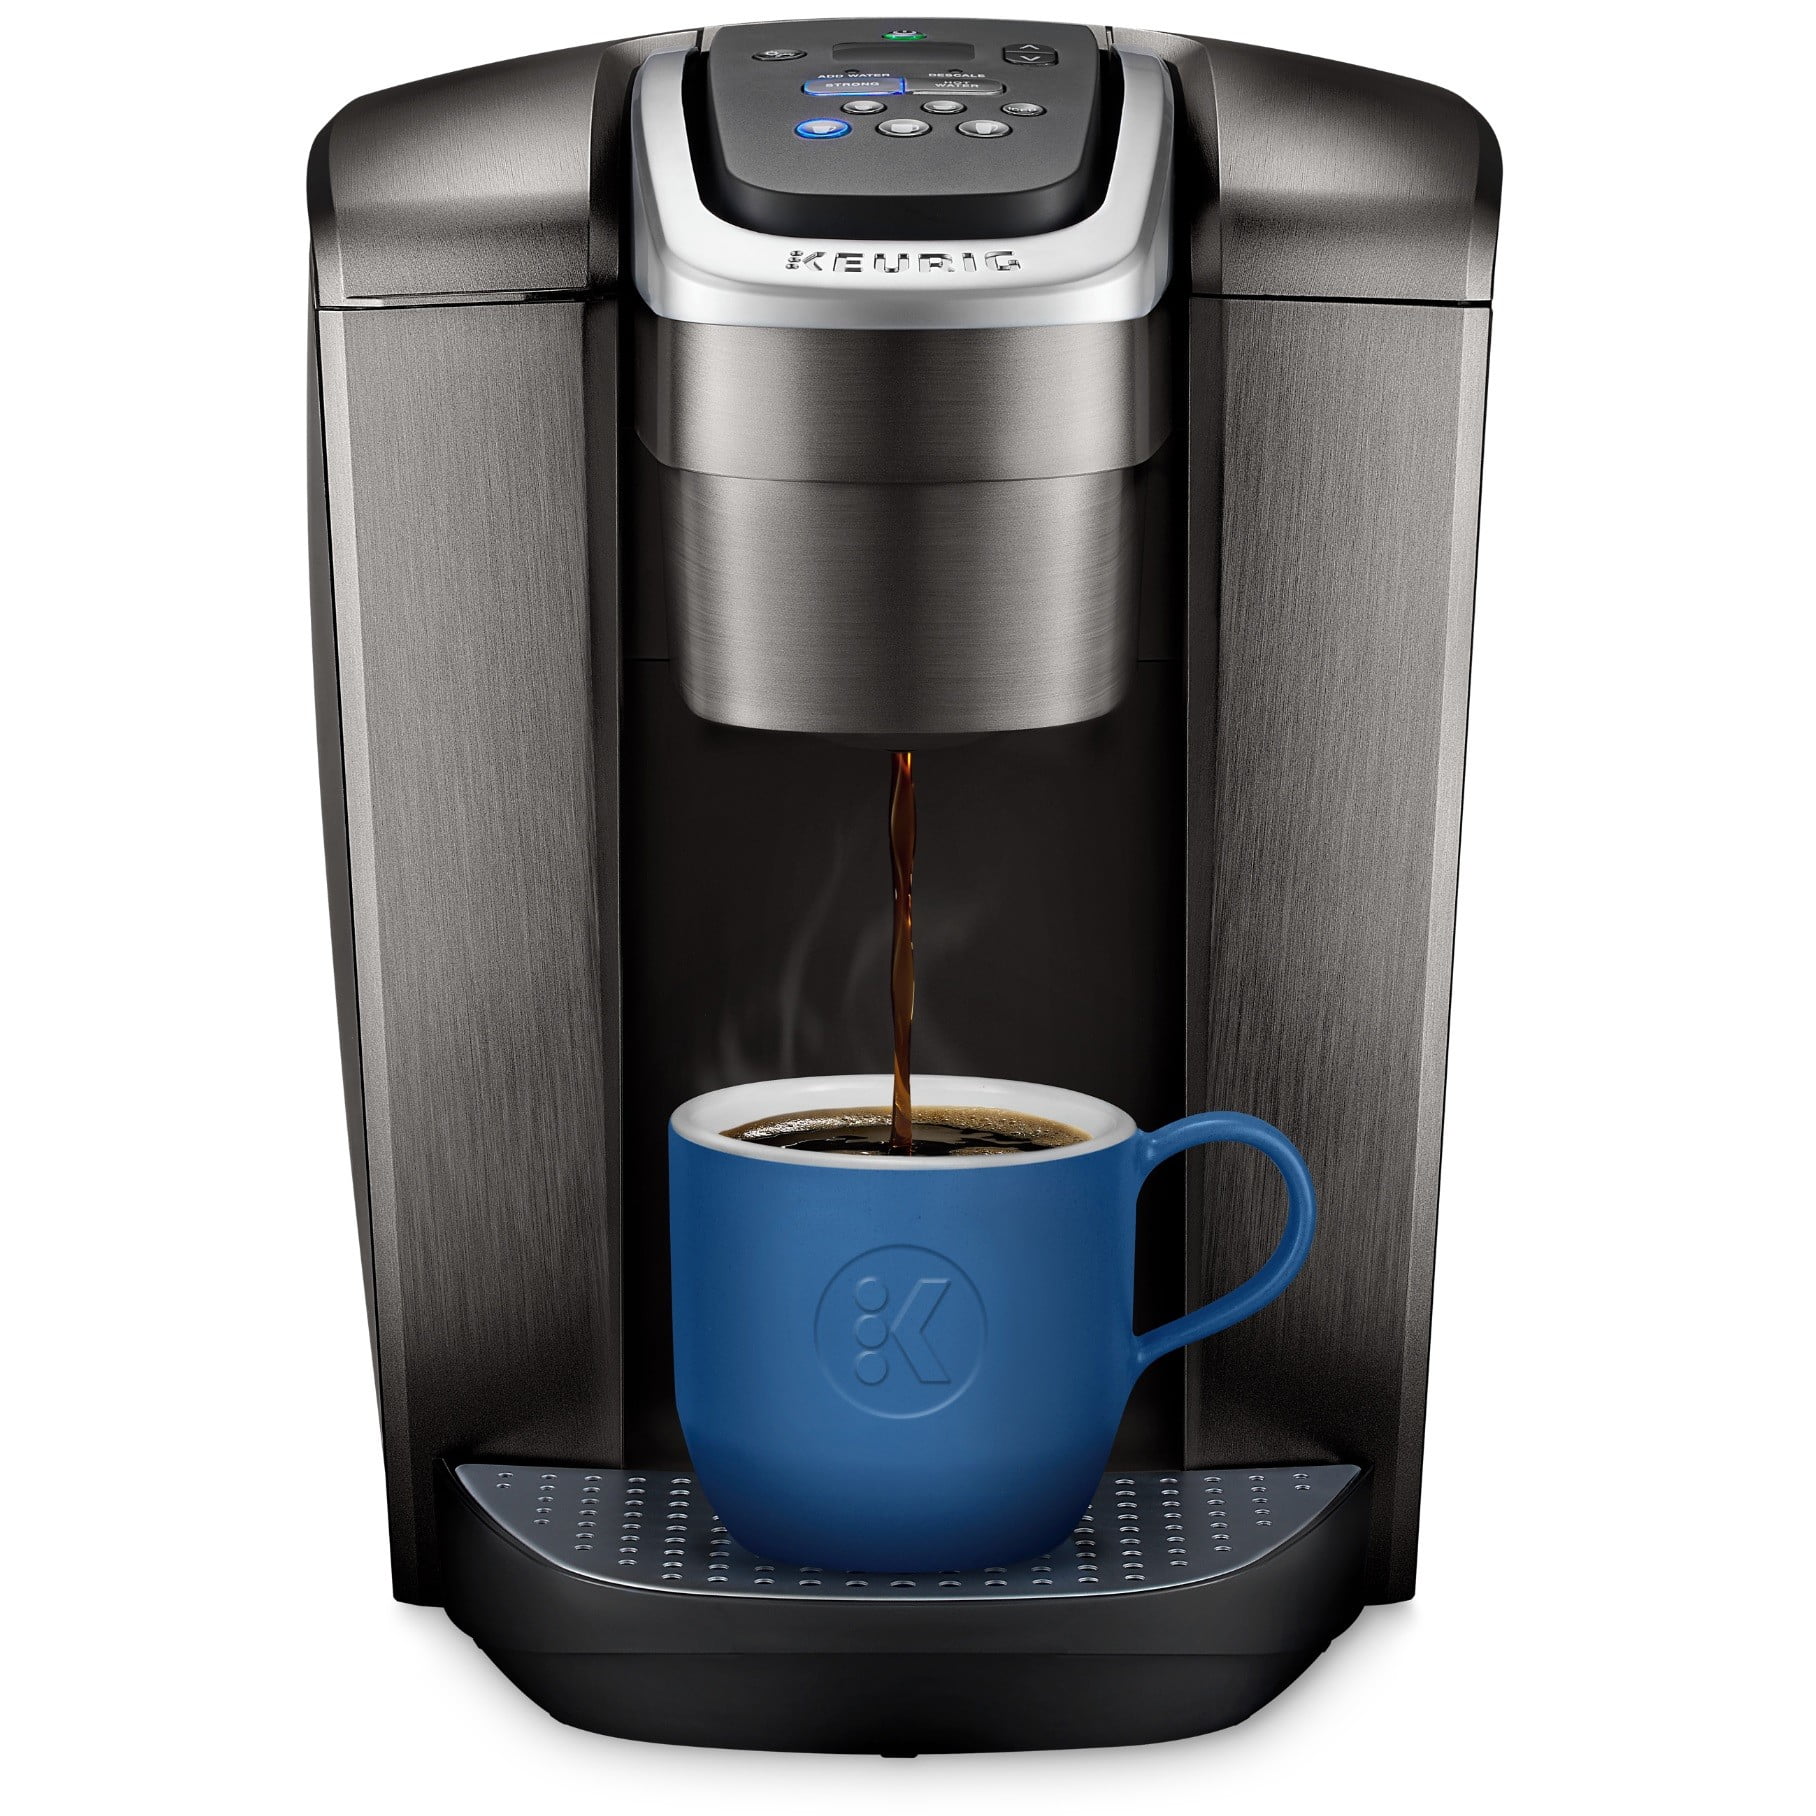 Mr. Coffee® Single-Serve Frappe™, Iced, and Hot Coffee Maker and